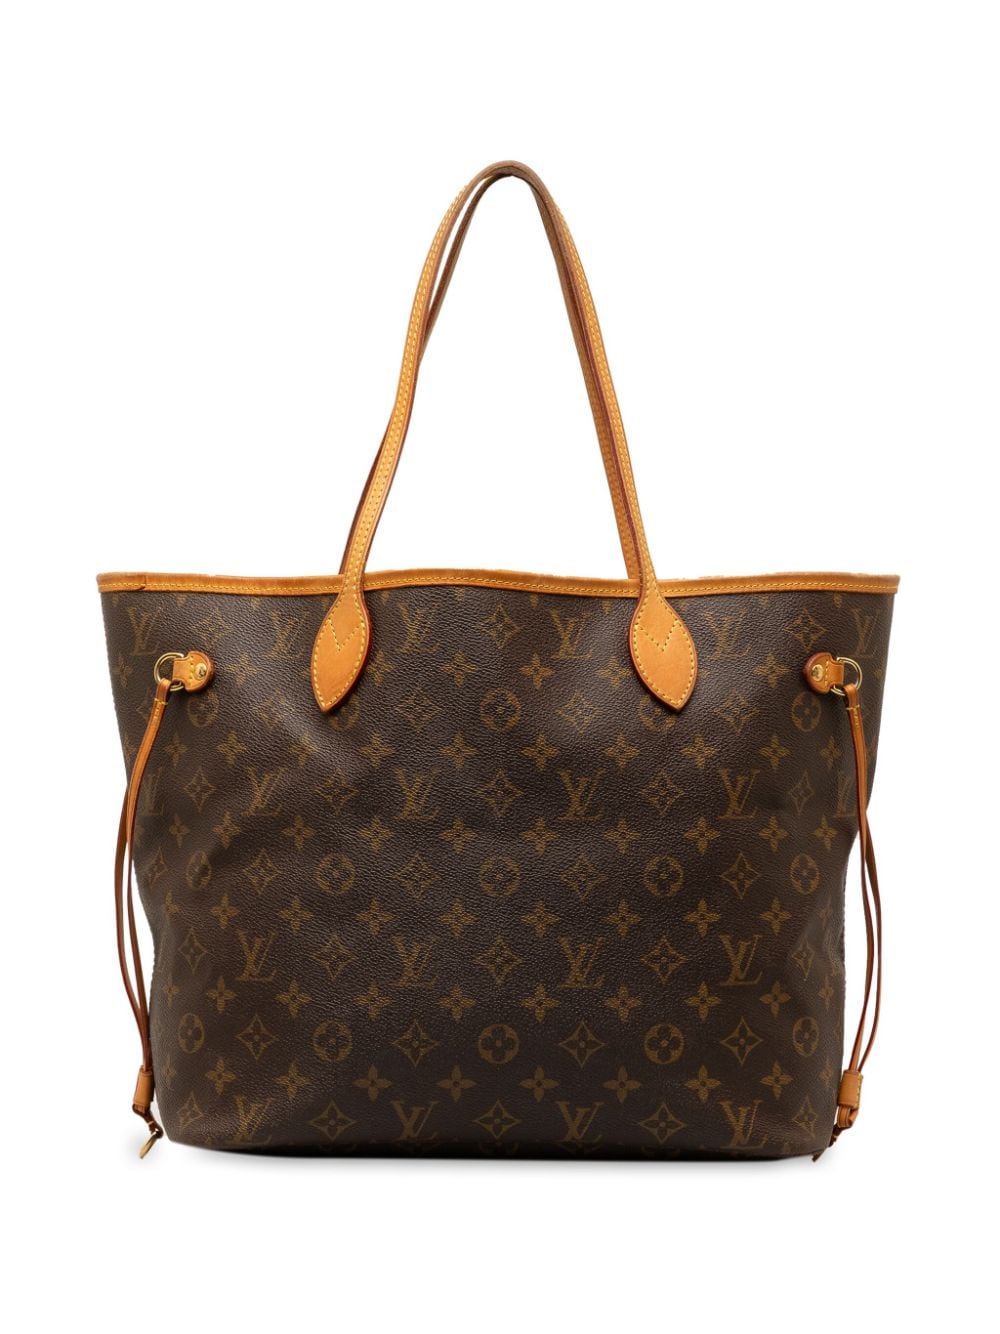 Louis Vuitton Pre-Owned 2009 Monogram Neverfull MM tote bag - Marrone